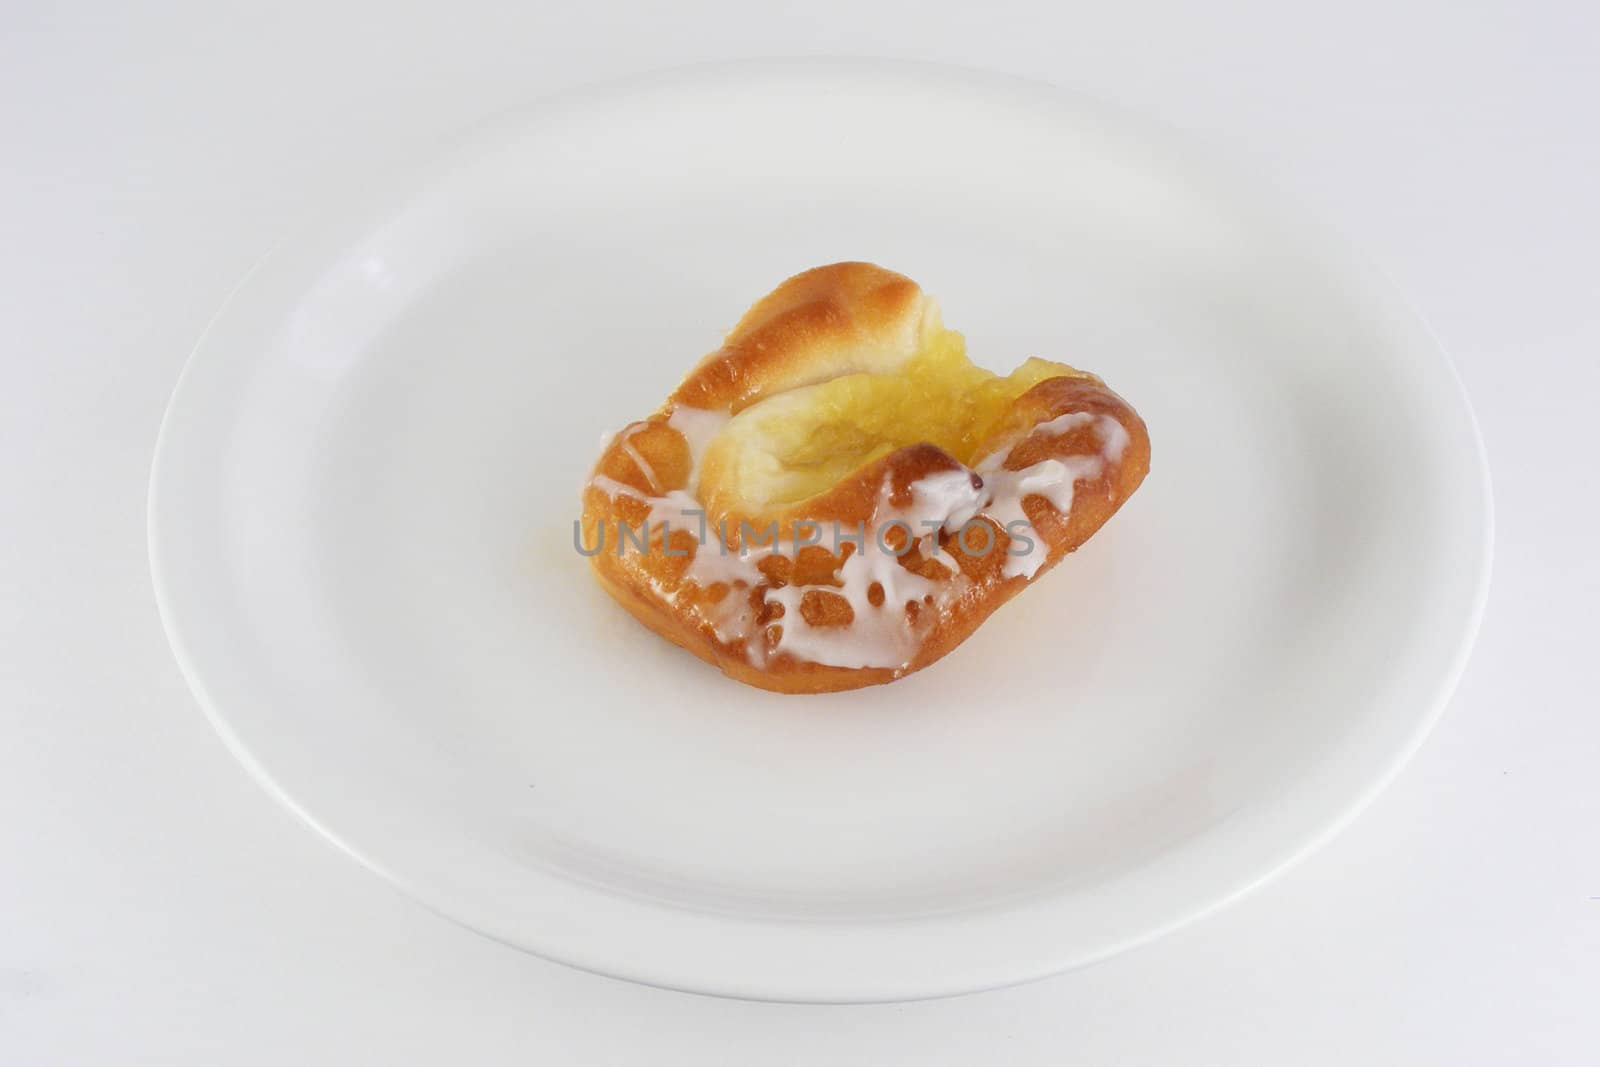 A pineapple danish roll with sugar icing.